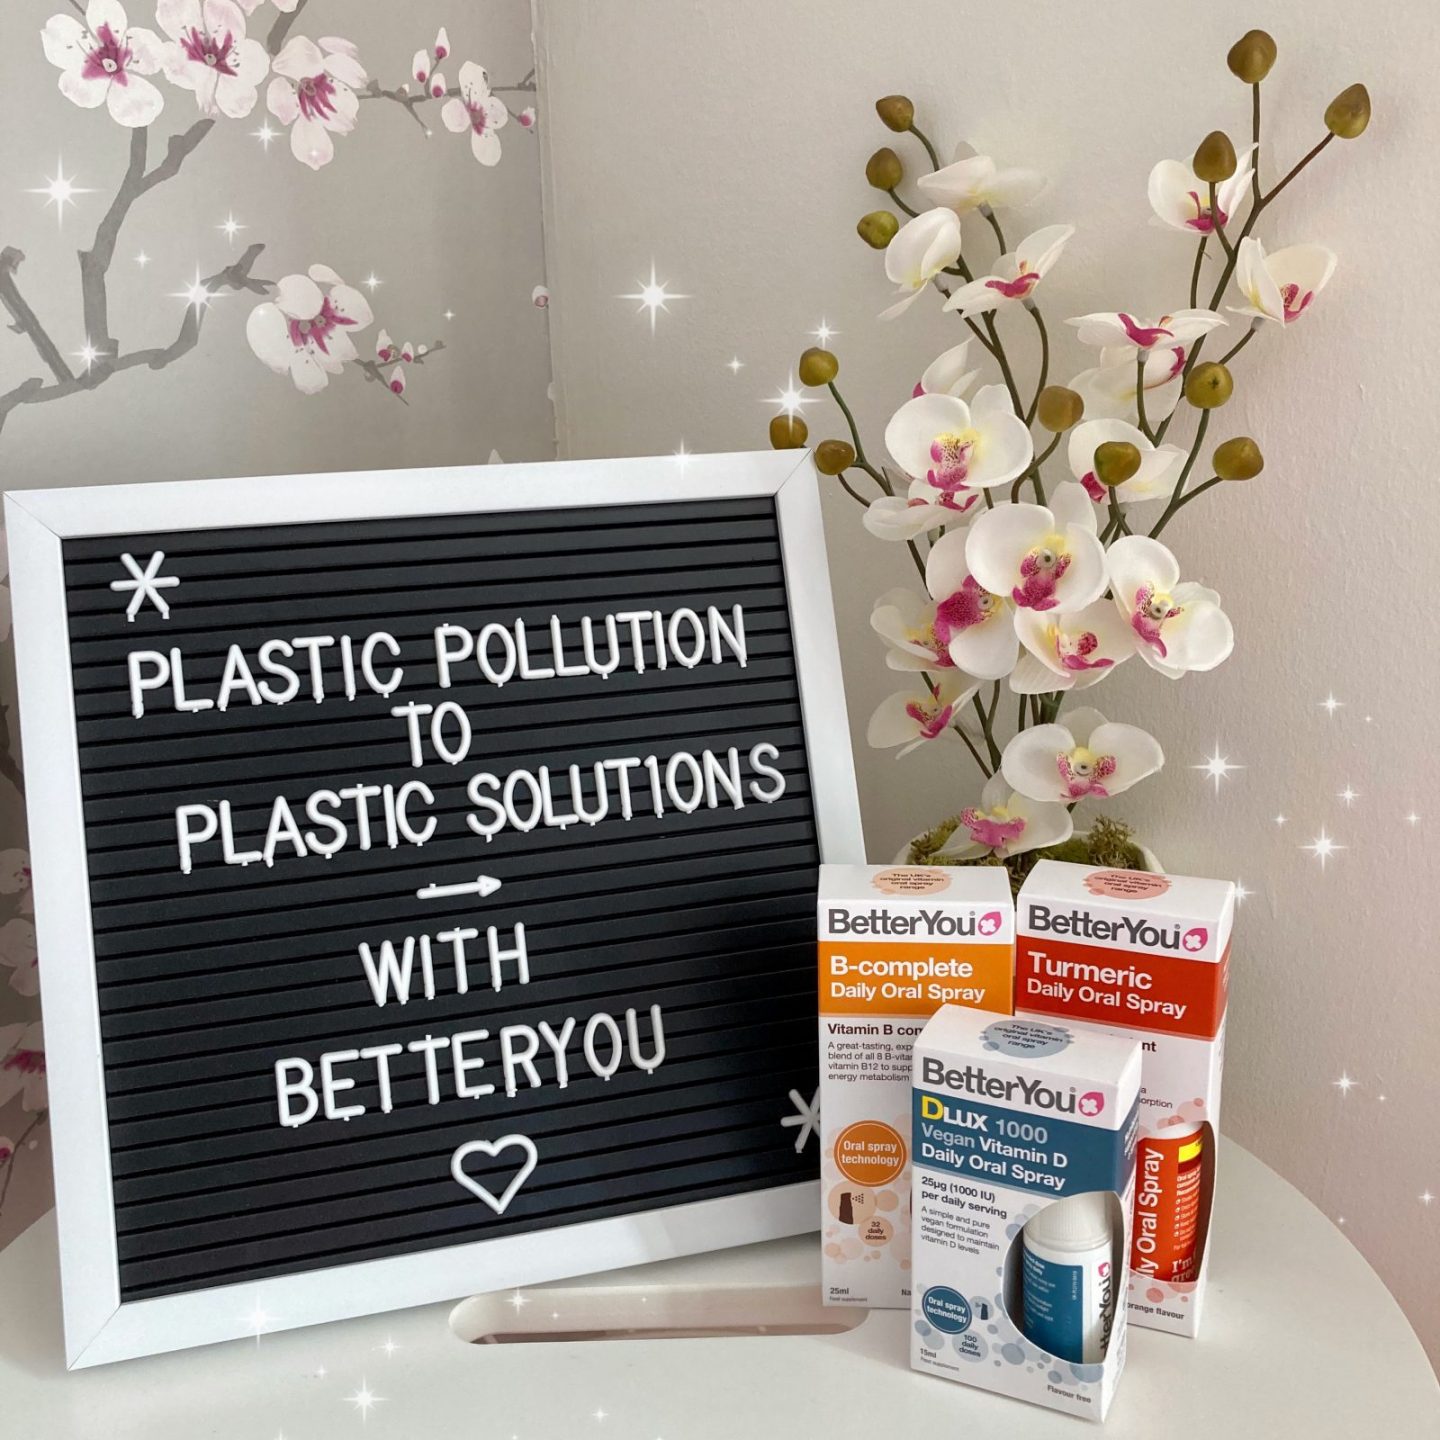 black and white letterboard reading "plastic pollution to plastic solutions with BetterYou" on white table next to decorative flowers and three of BetterYou's colourful transdermal sprays